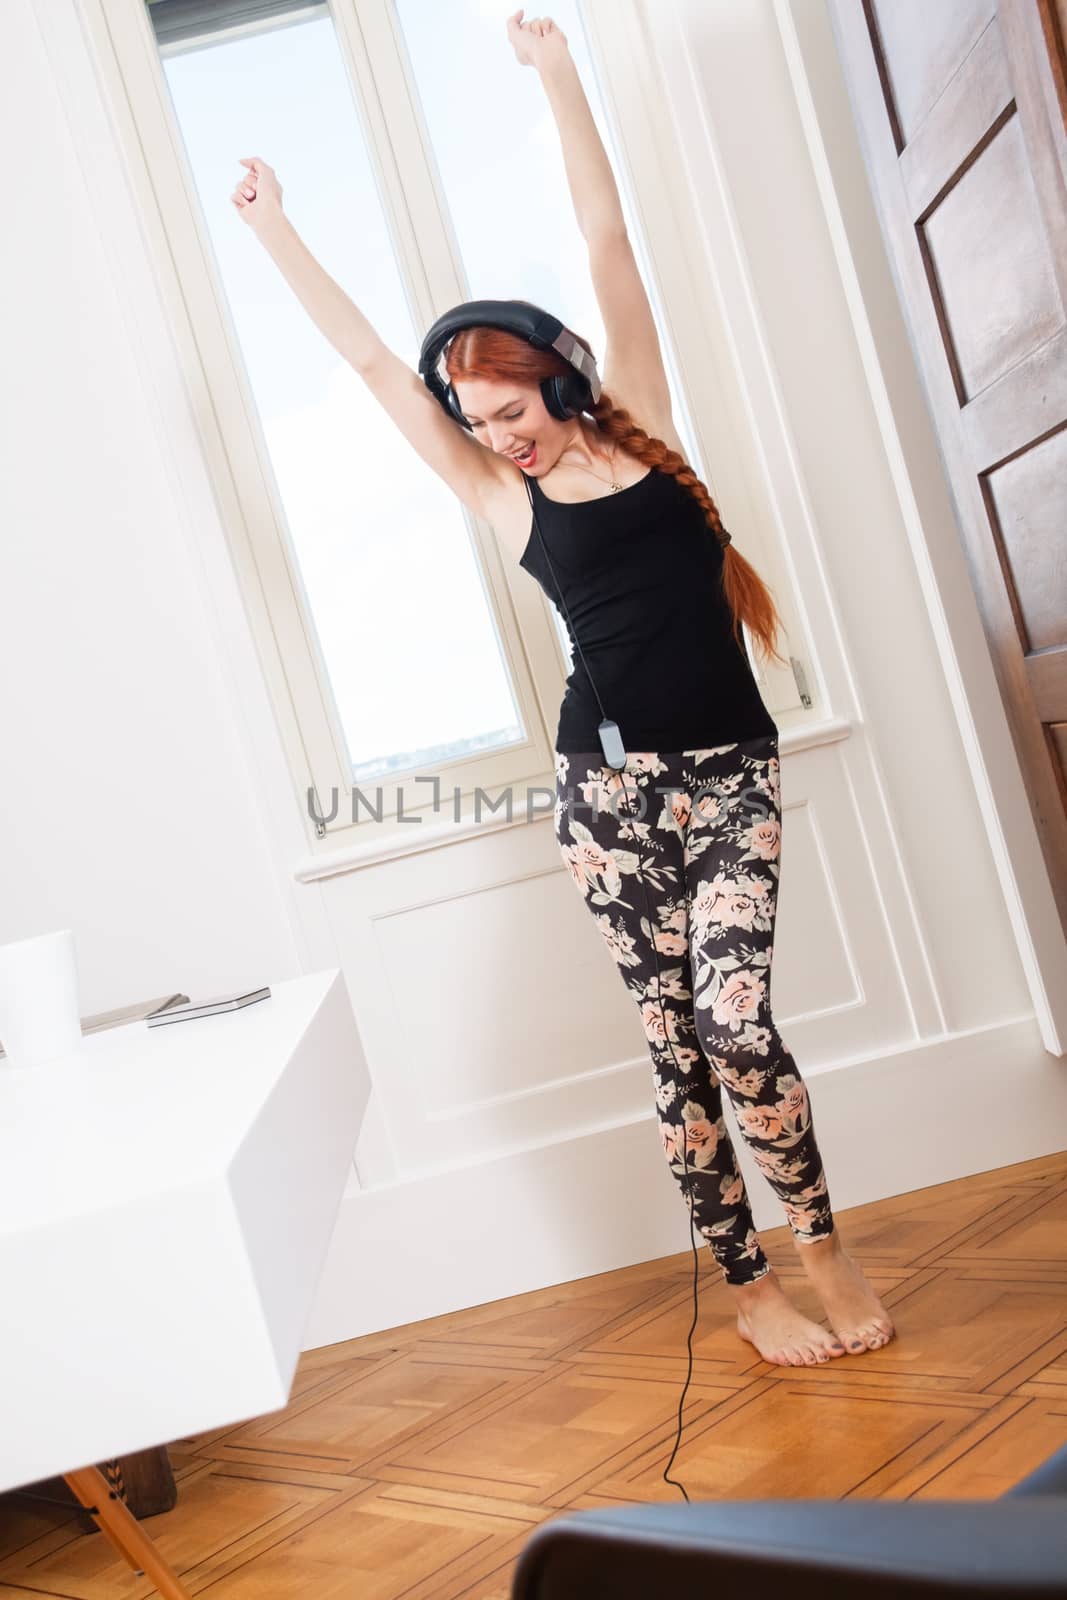 Happy Young Woman Dancing While Listening her Favorite Music Using Headphone Inside her Room.